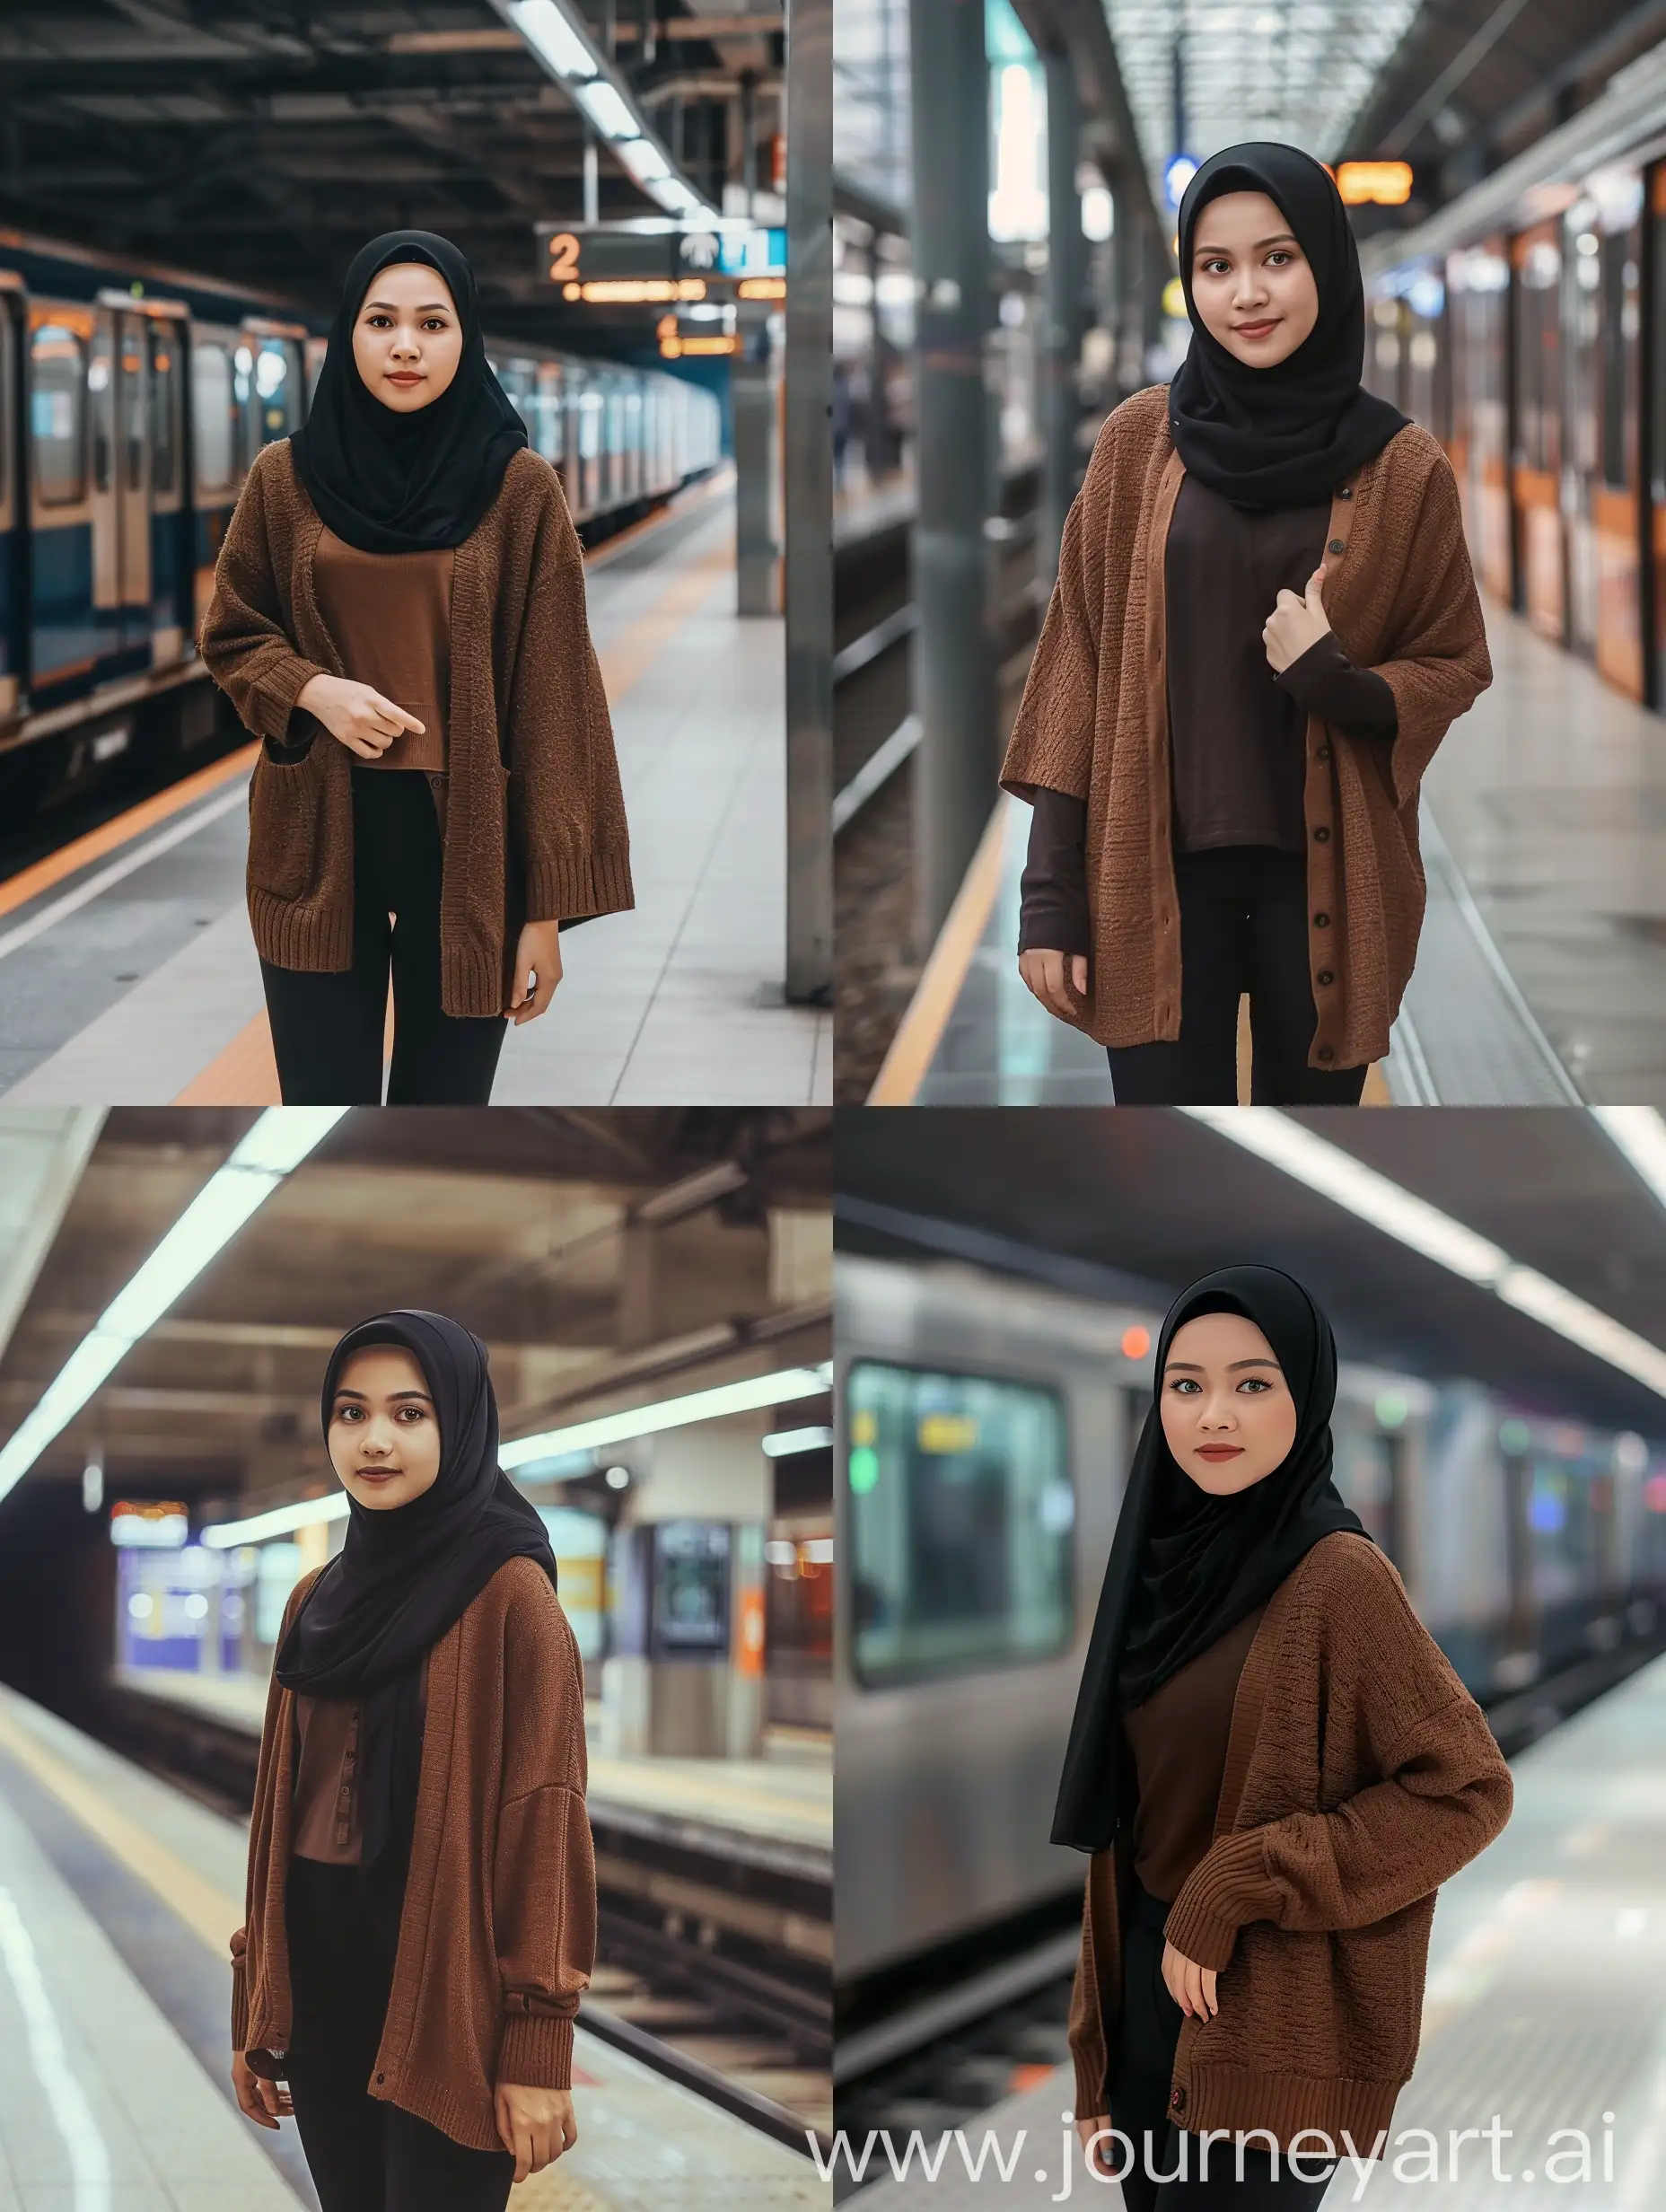 Indonesian-Woman-in-Black-Hijab-at-Train-Station